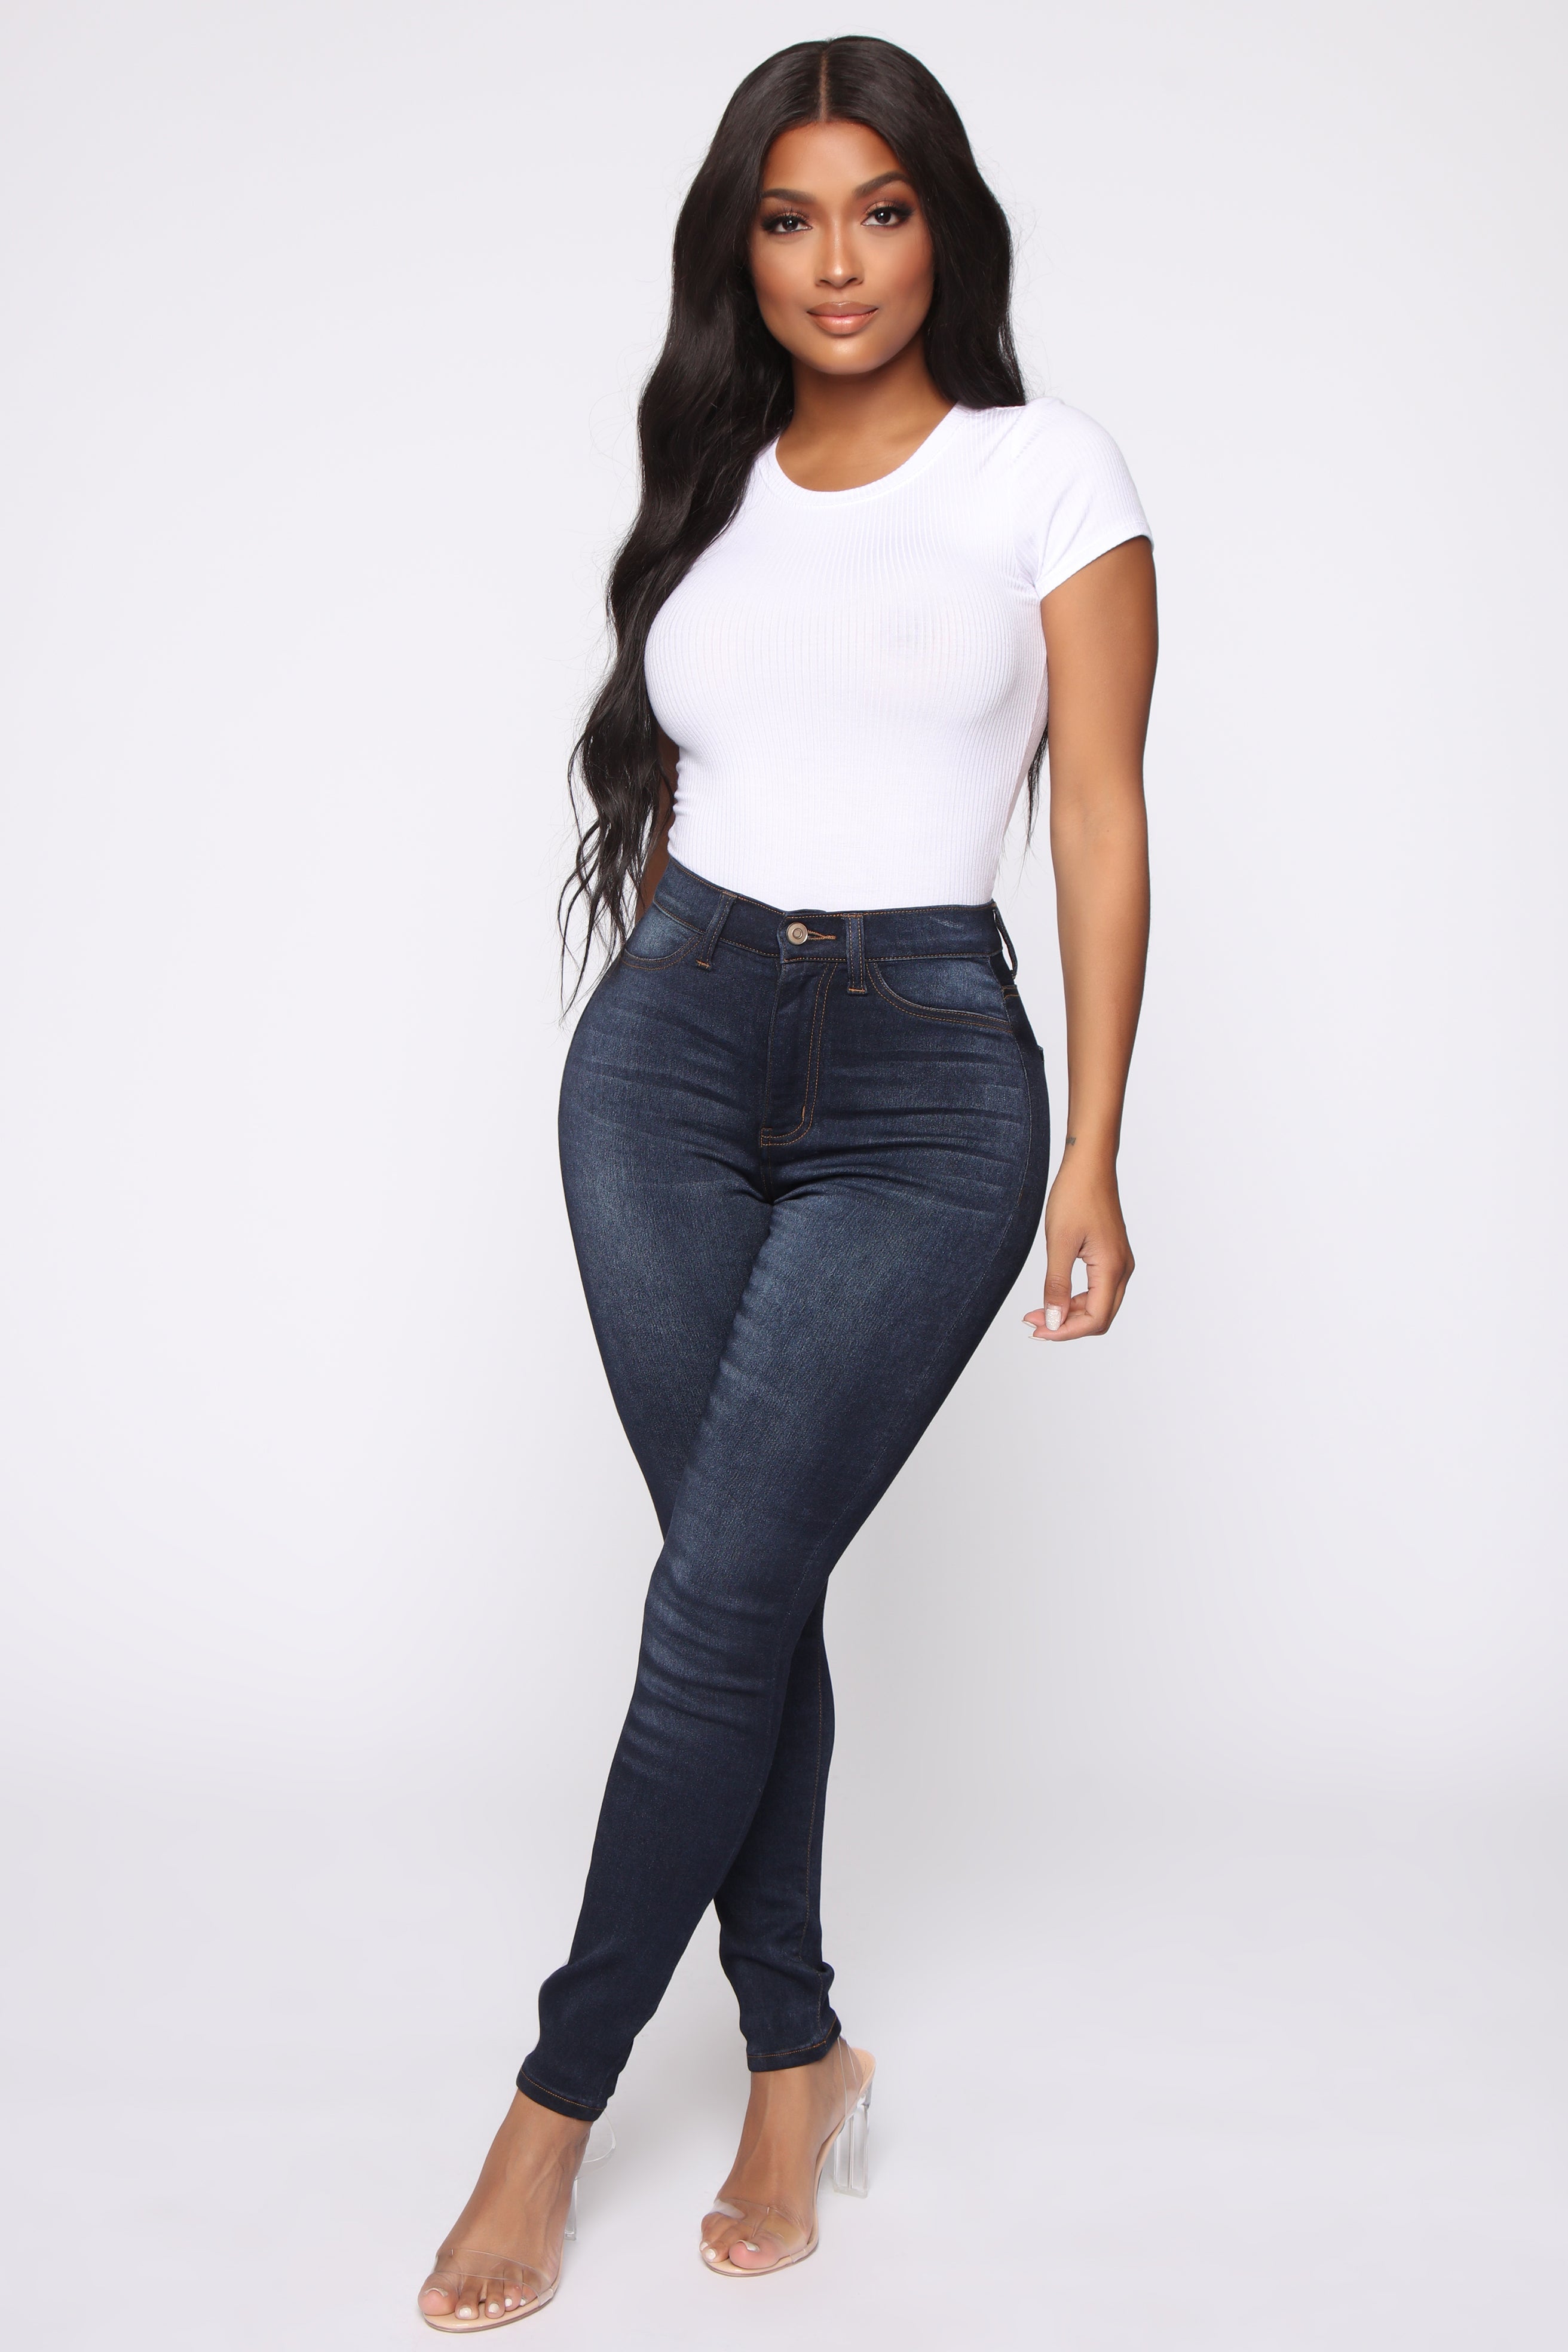 ShiDiva SlimDown  Thick girls outfits, Curvy girl outfits, Curvy women  jeans